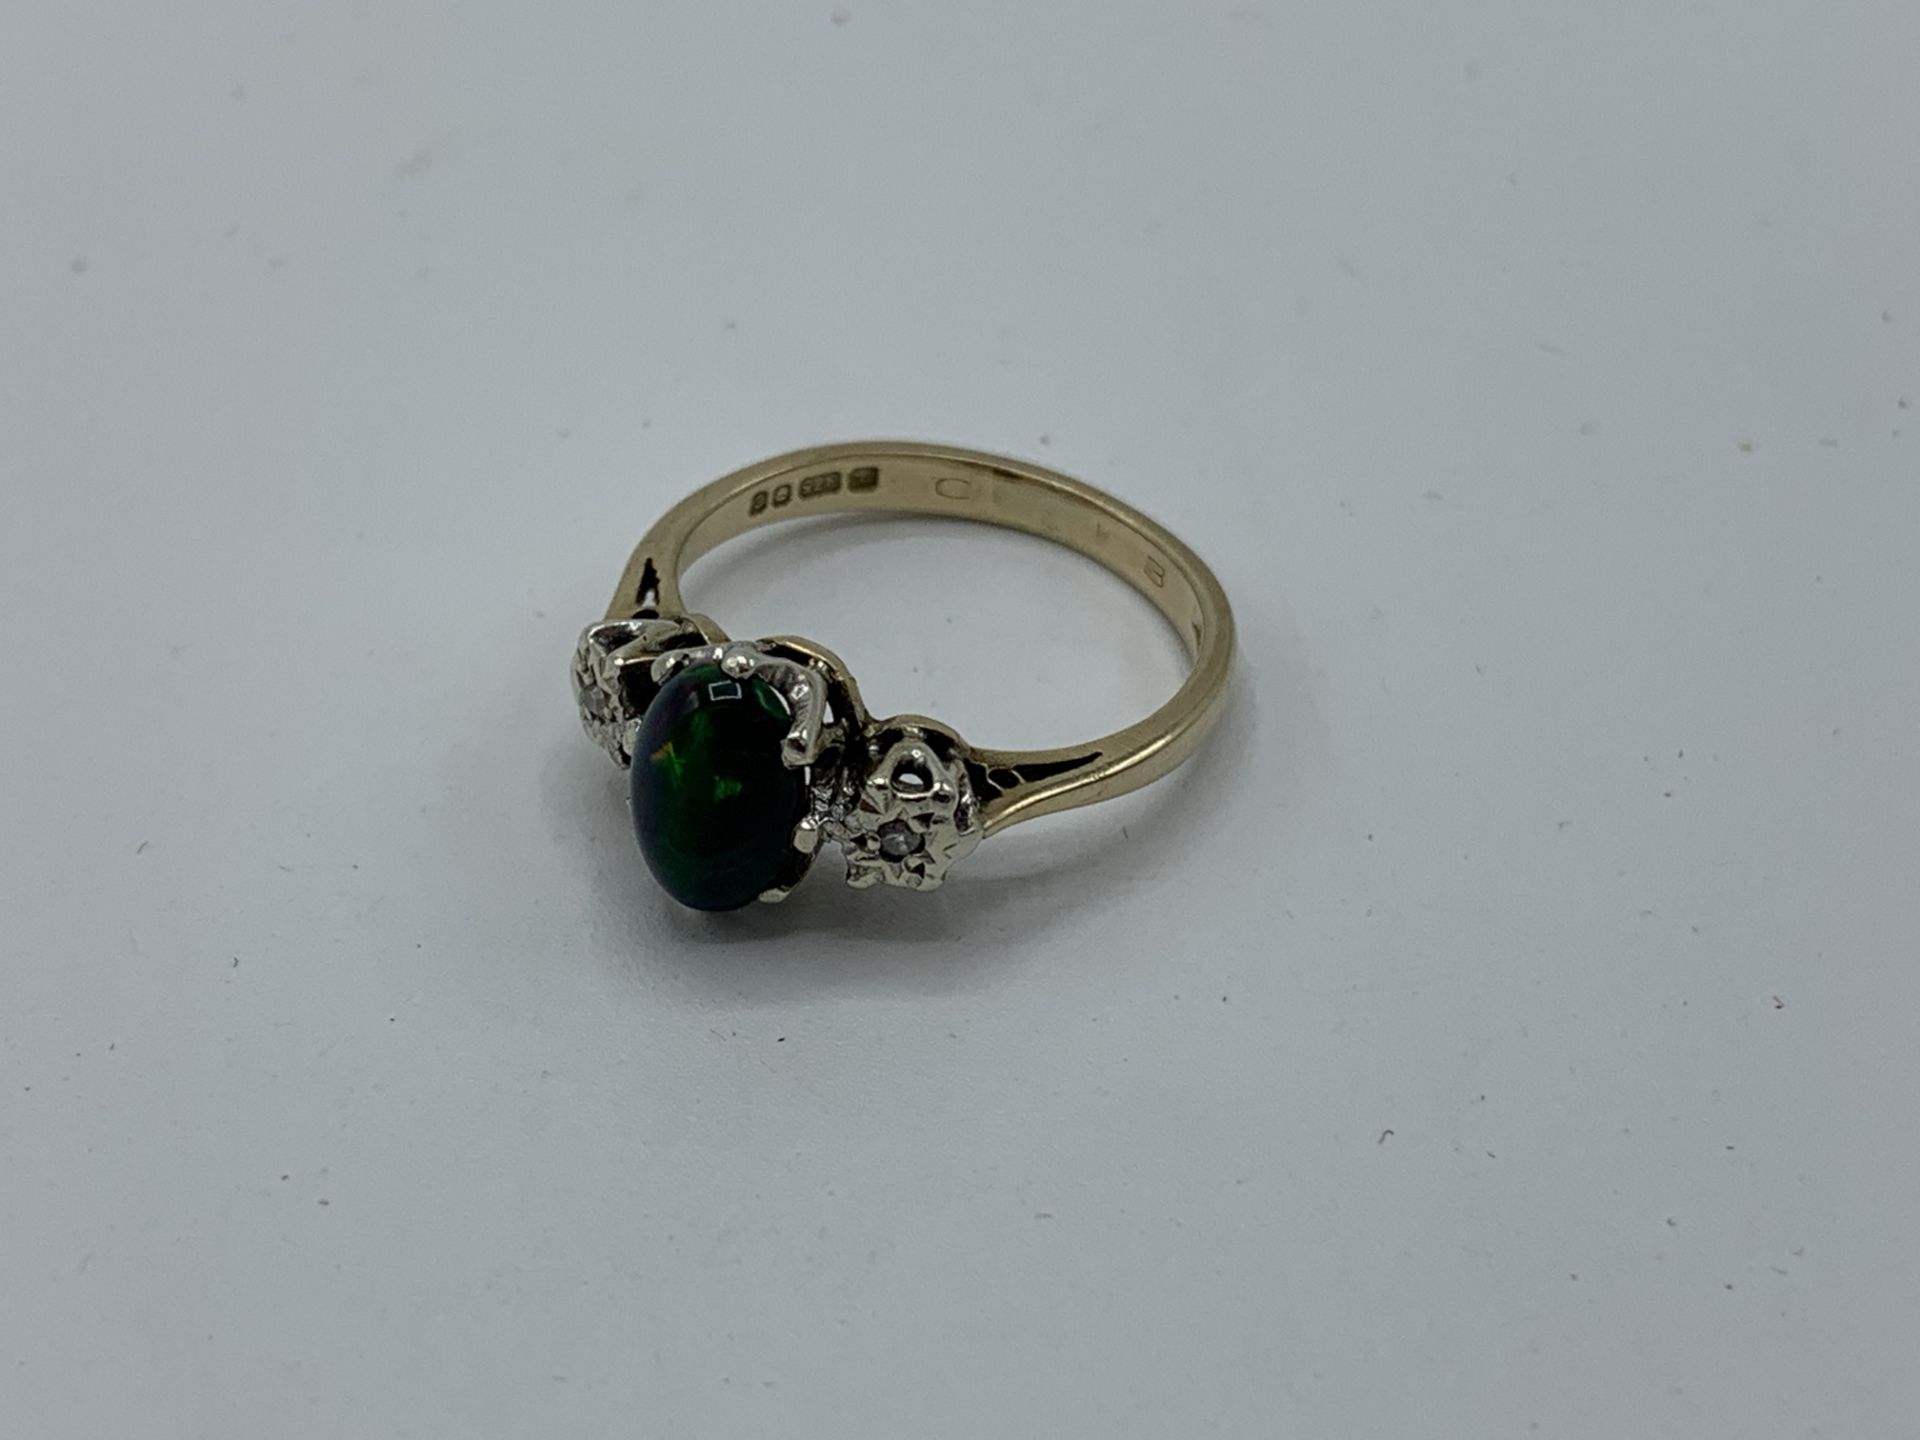 9ct gold ring with centre black opal and diamond either side, weight 2.5gms, size L 1/2. Estimate £